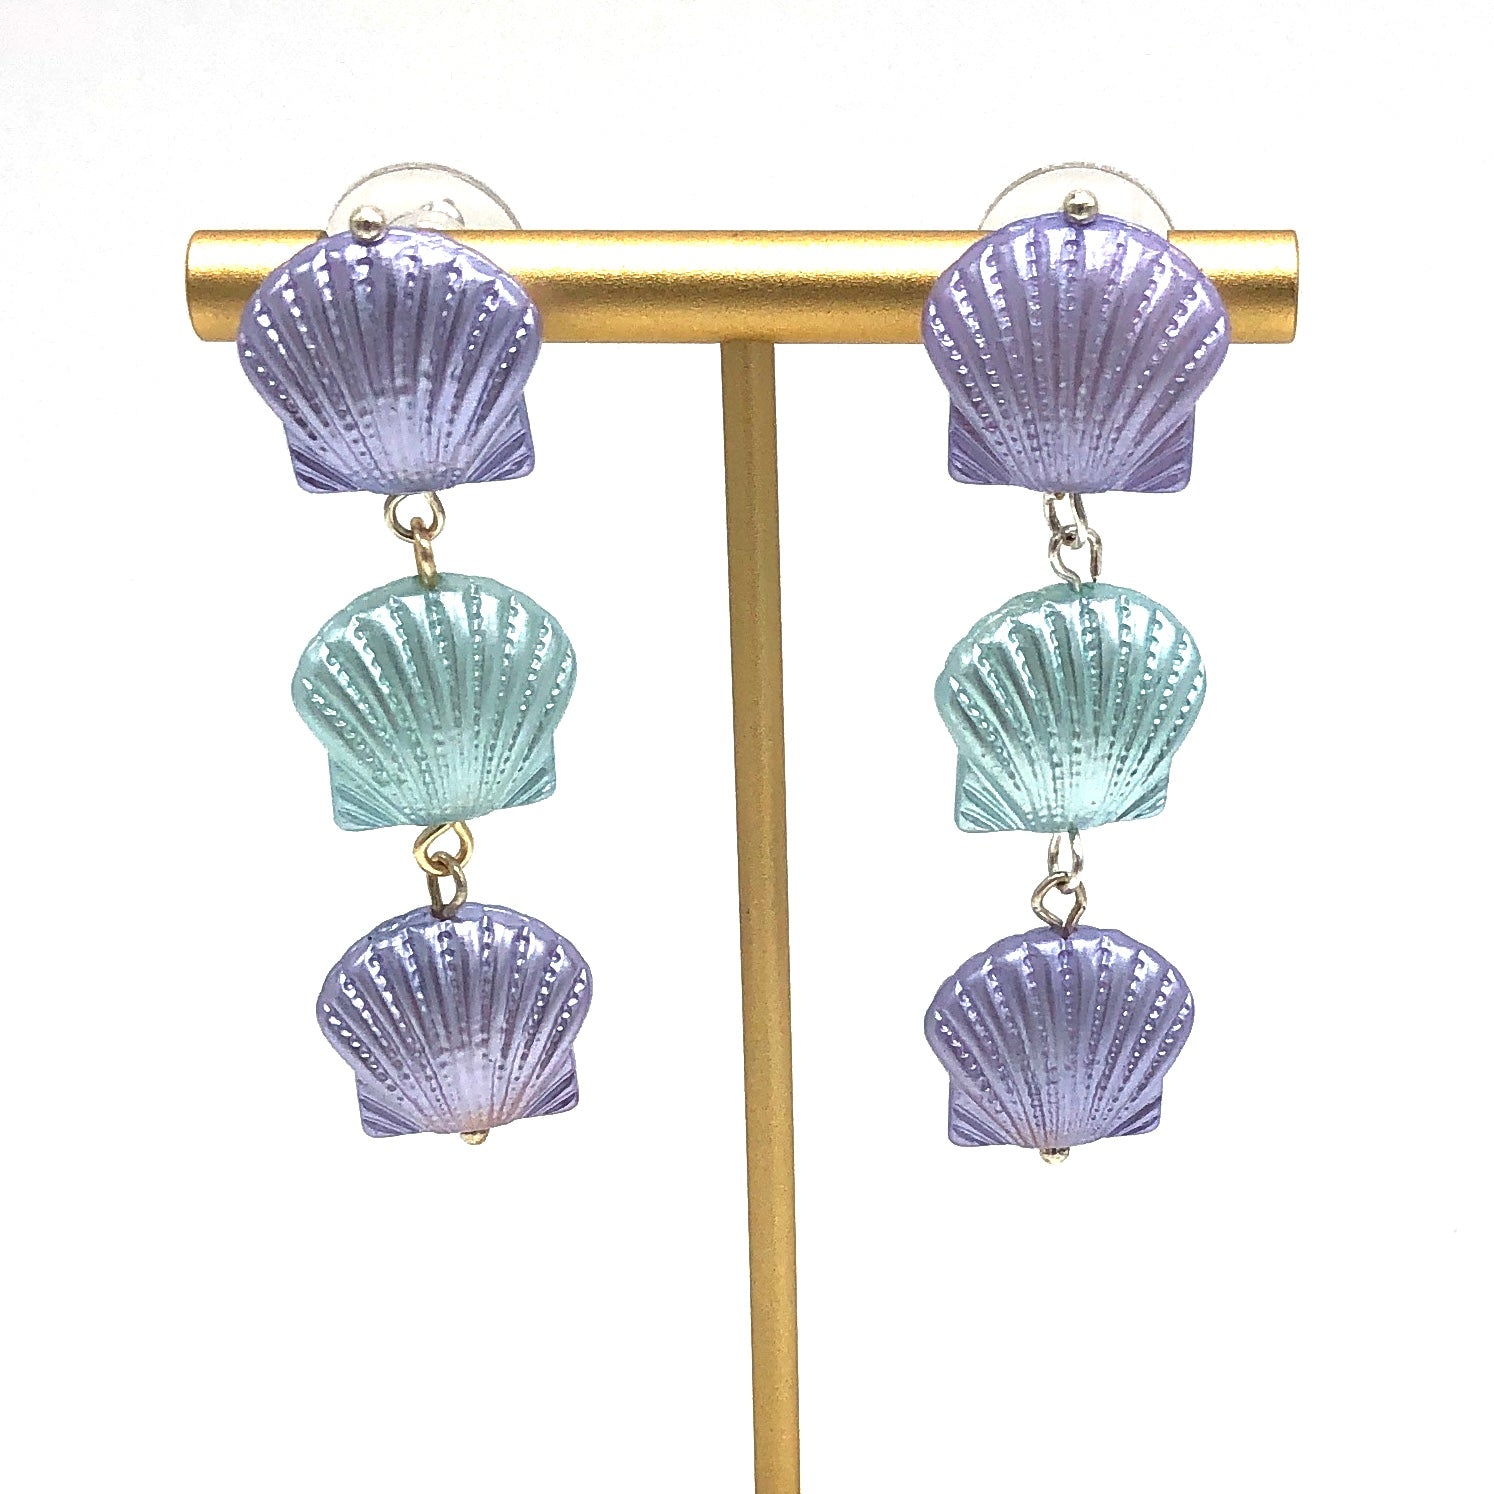 Periwinkle and ice blue seashell style earrings on a gold stand